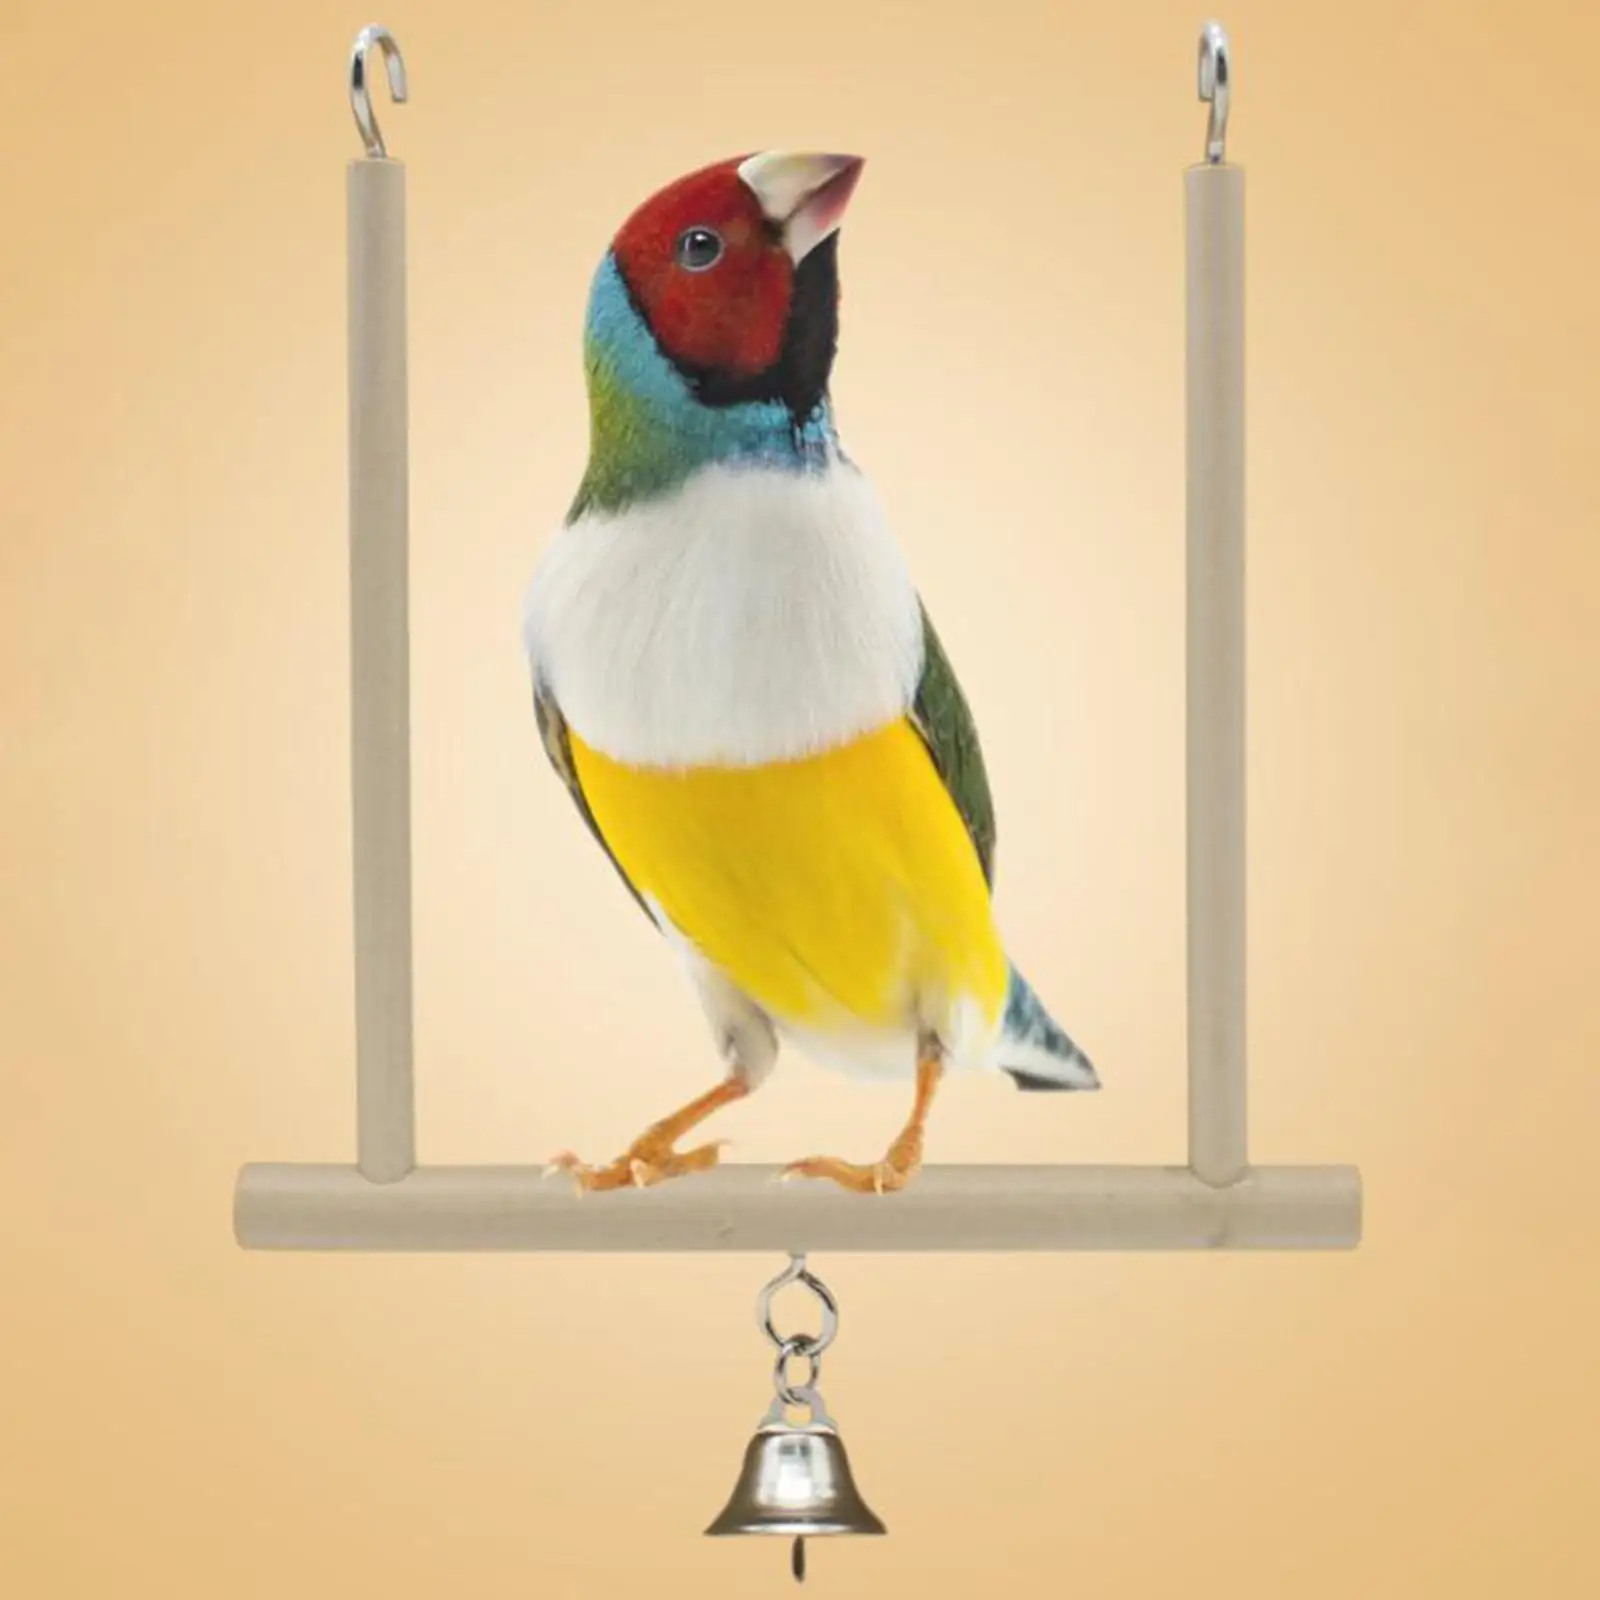  Perch Cage Hanging Toy Natural Wood Stand Parrot Bird Perch Cage Swing Wooden Perch for Macaw Parakeet Finch